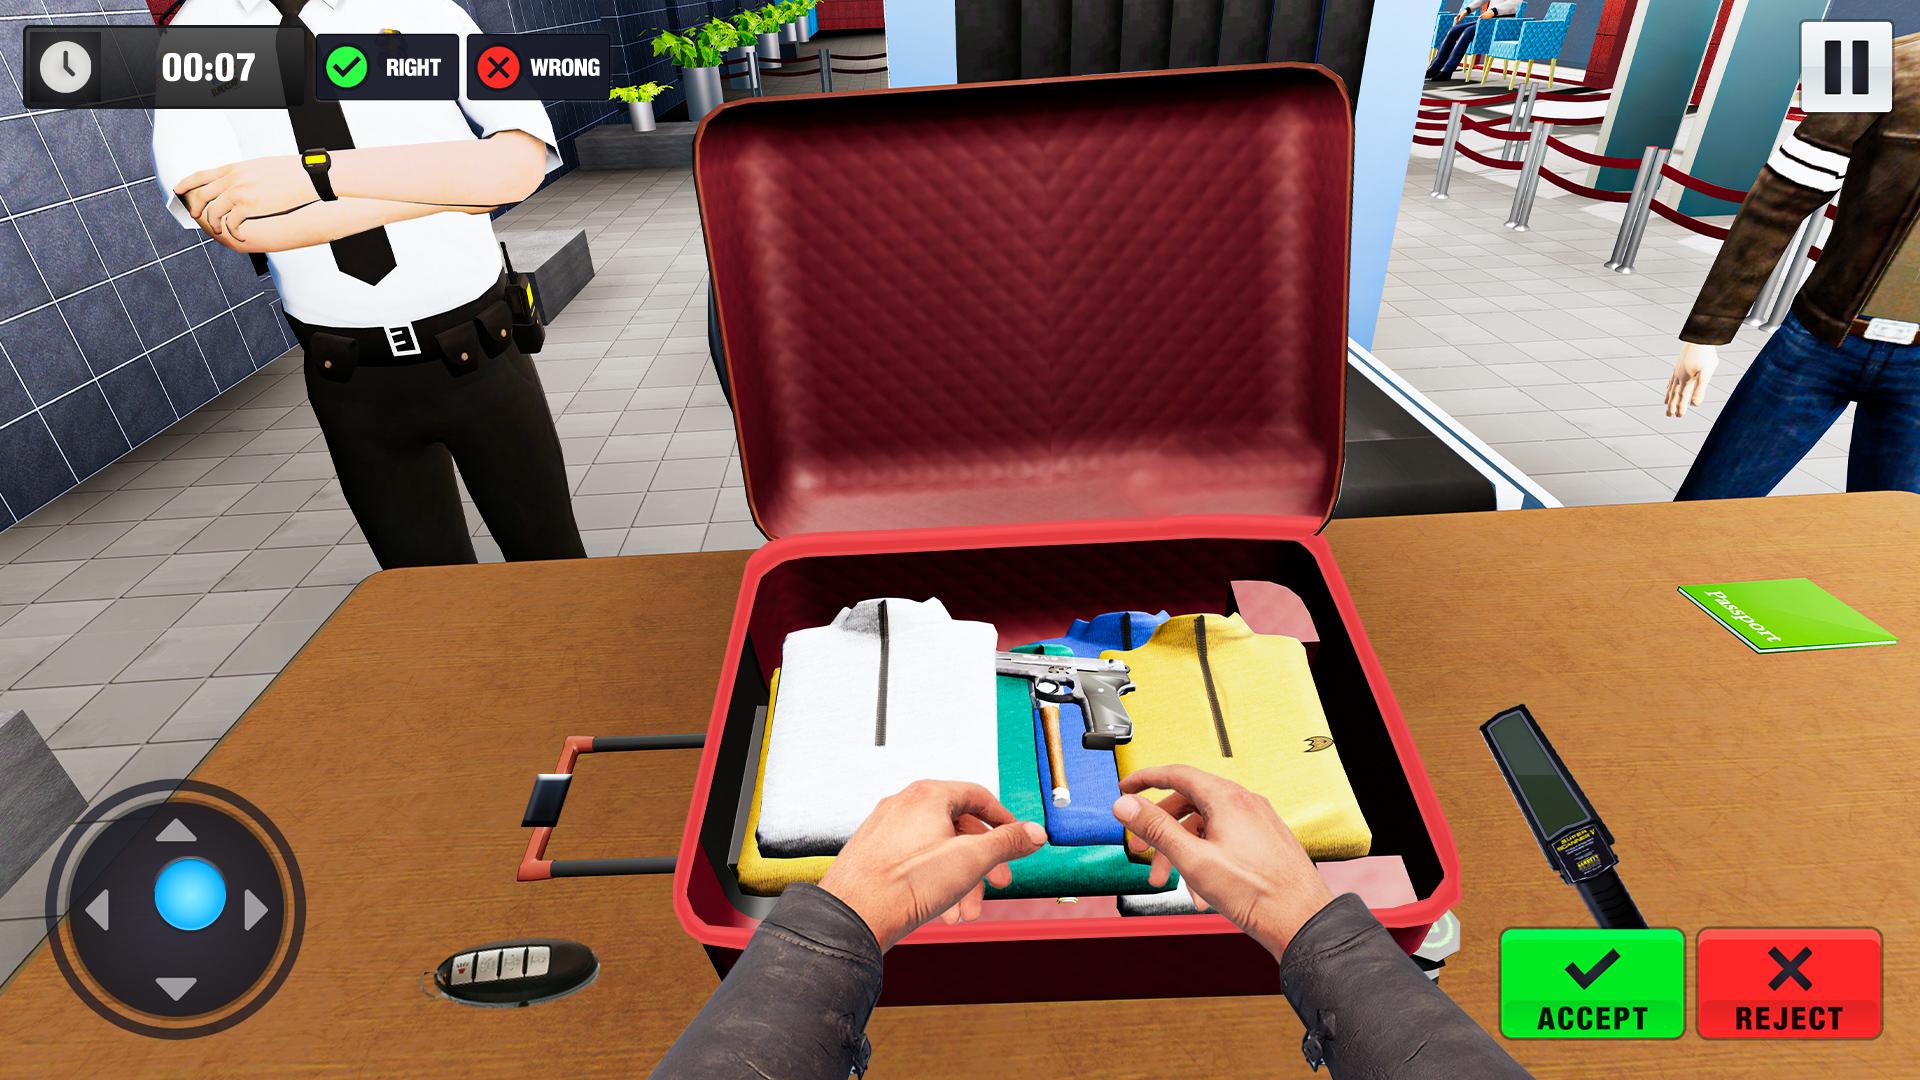 Airport Security game. Airport security игра